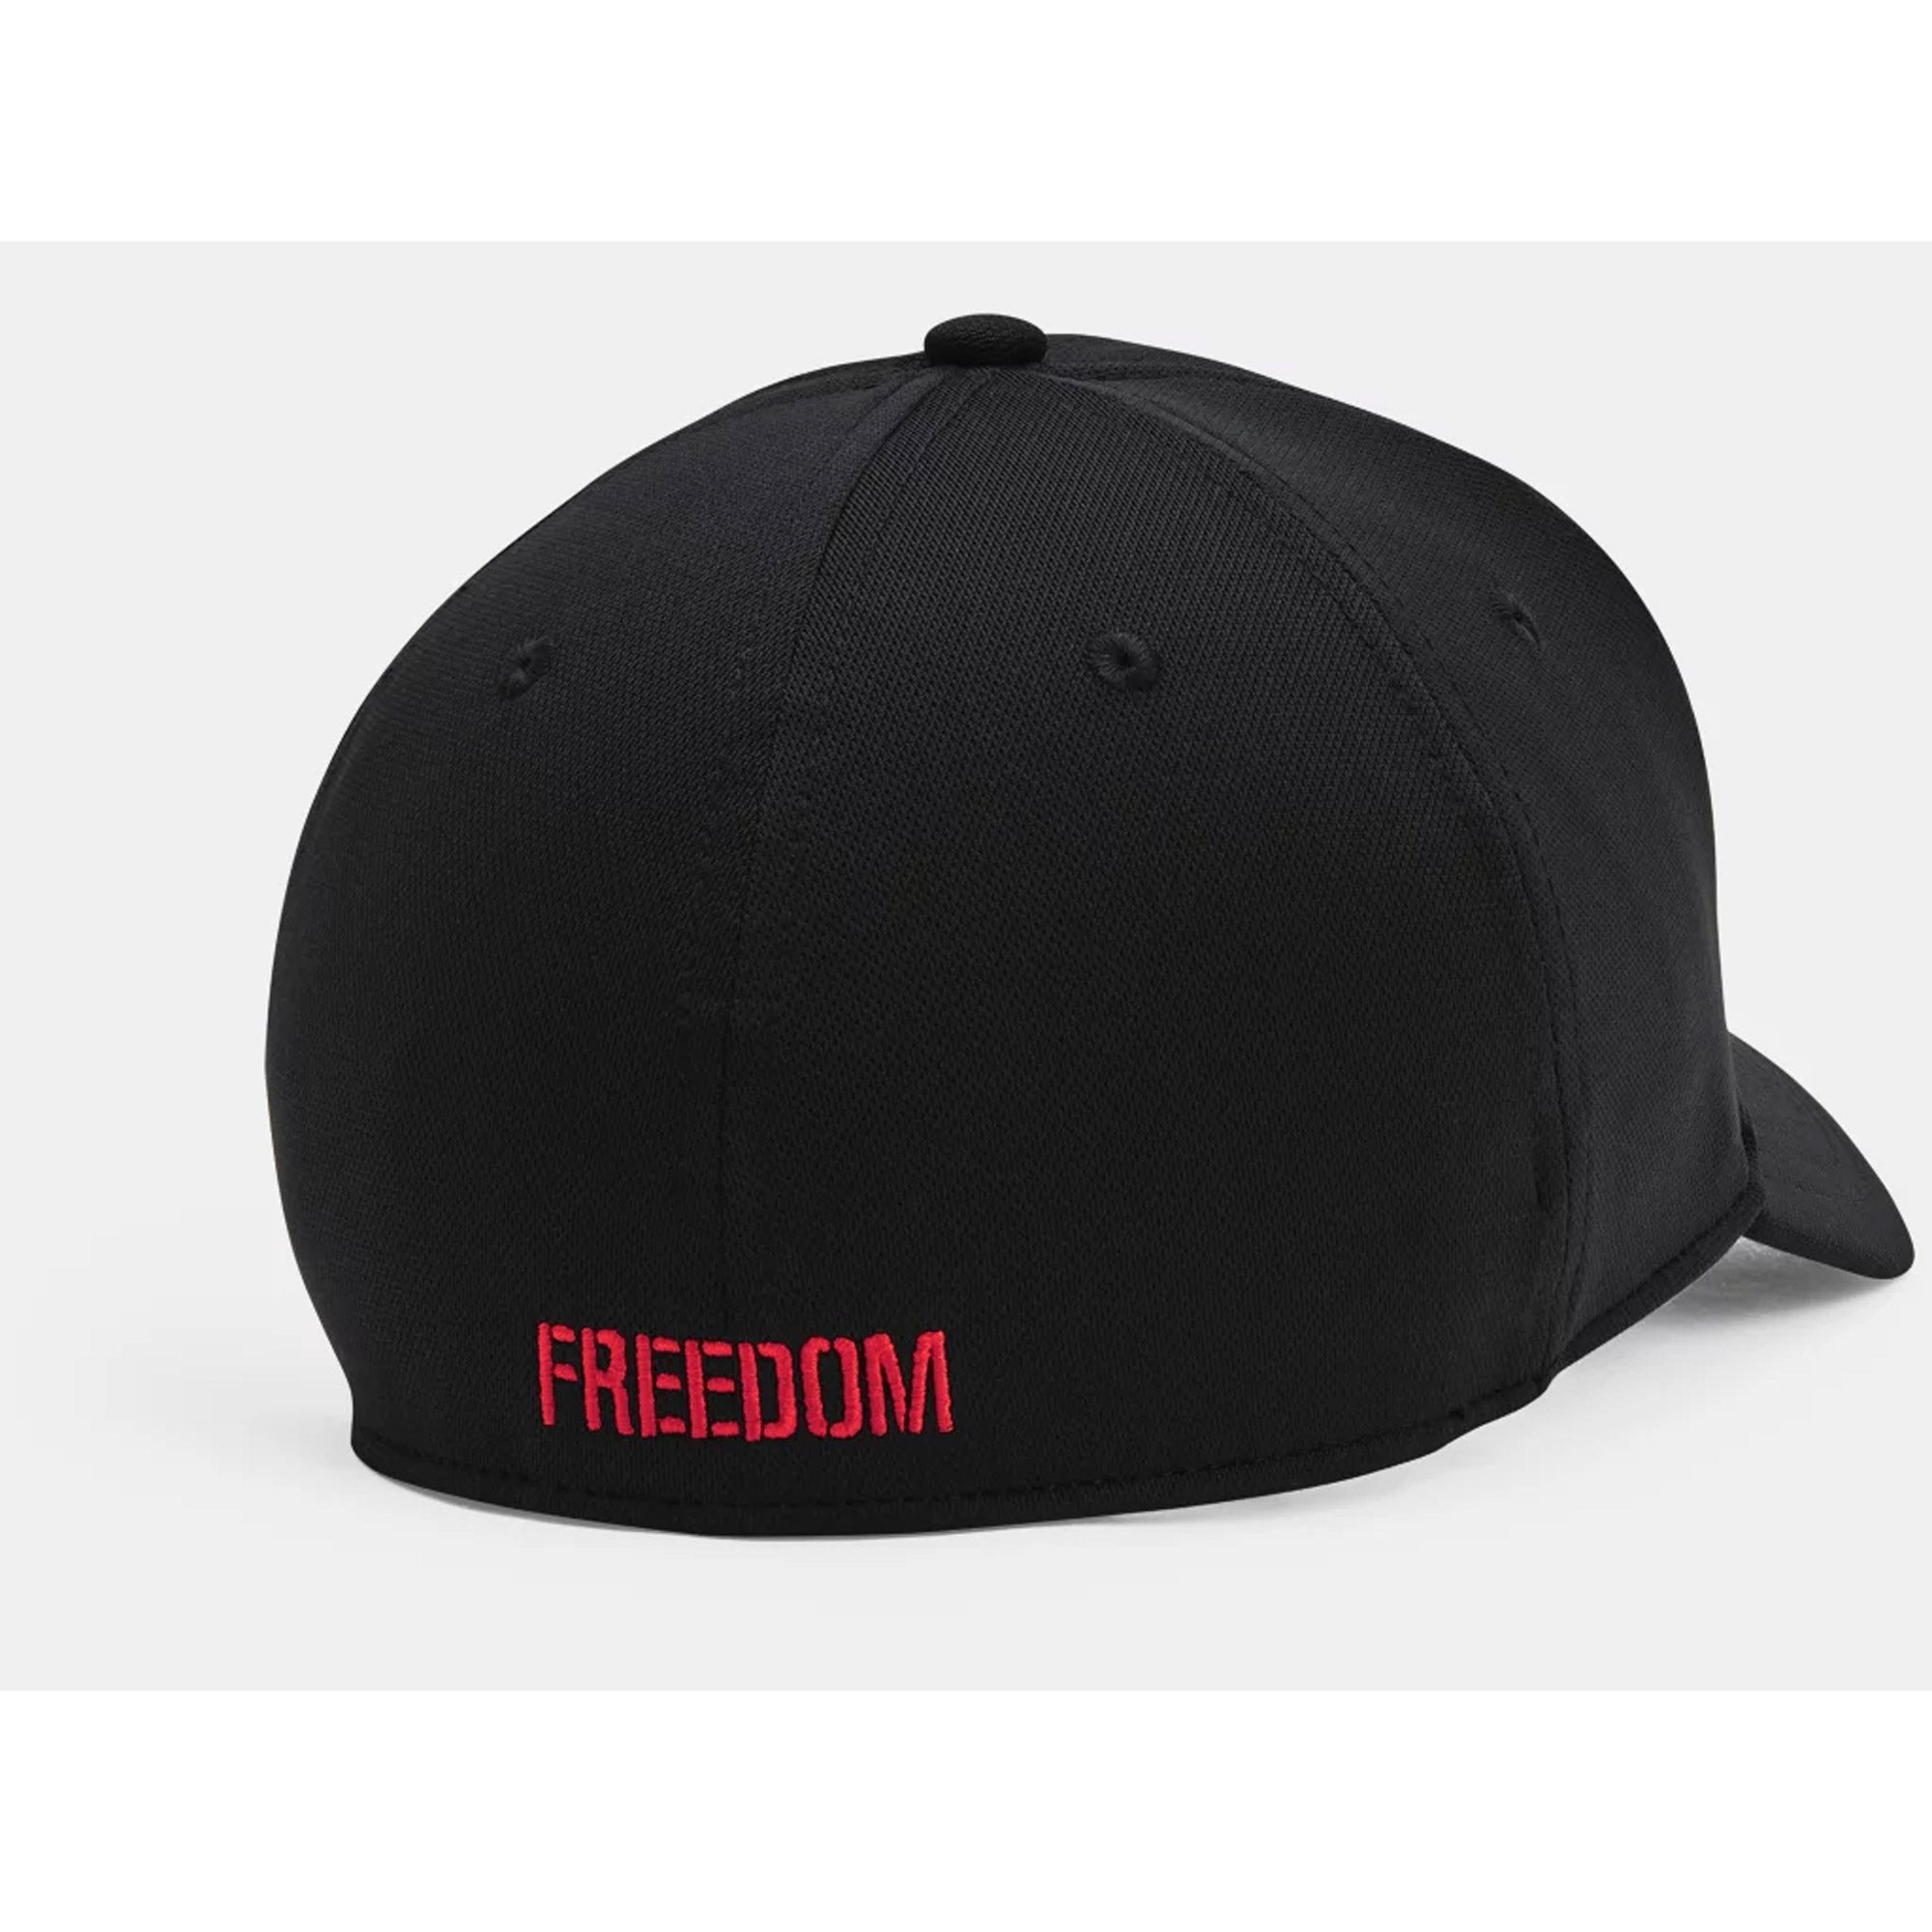  Under Armour 1362236-001 Freedom Blitzing Cap in Black Back